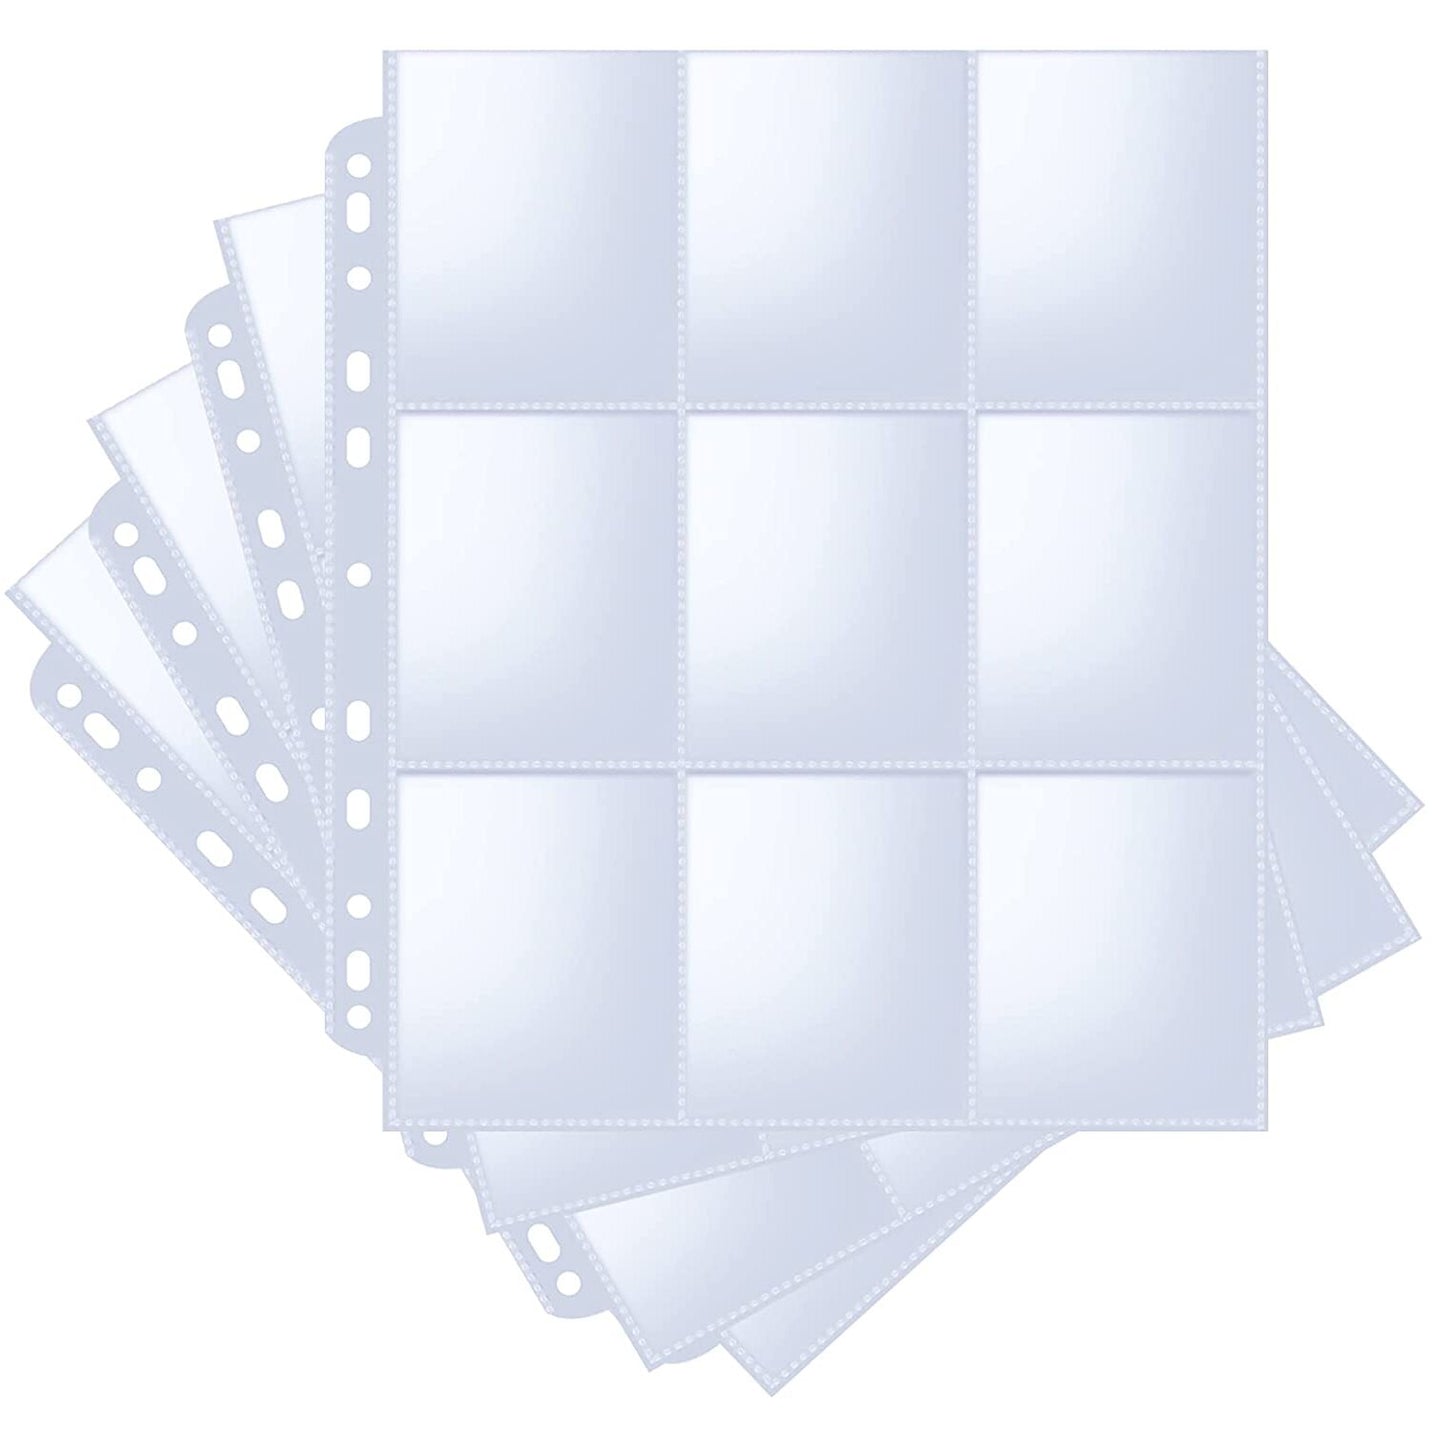 20 PAGE PACK OF 9 POCKET CLEAR BINDER SHEETS